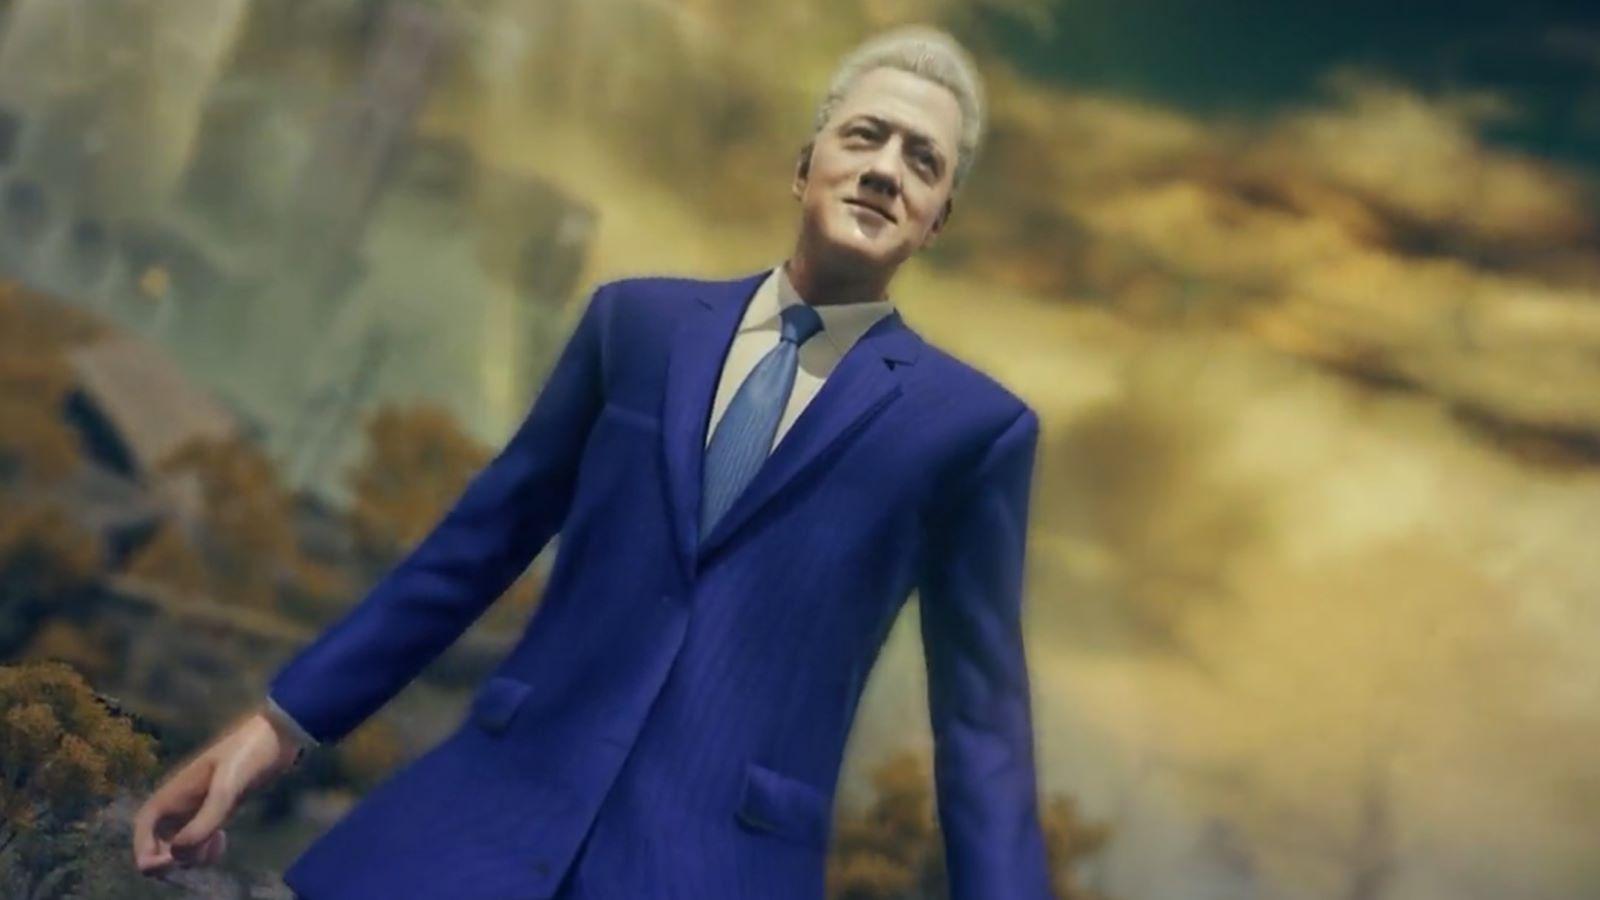 Fan mods Bill Clinton into Elden Ring after The Game Awards 2022 stage  invasion